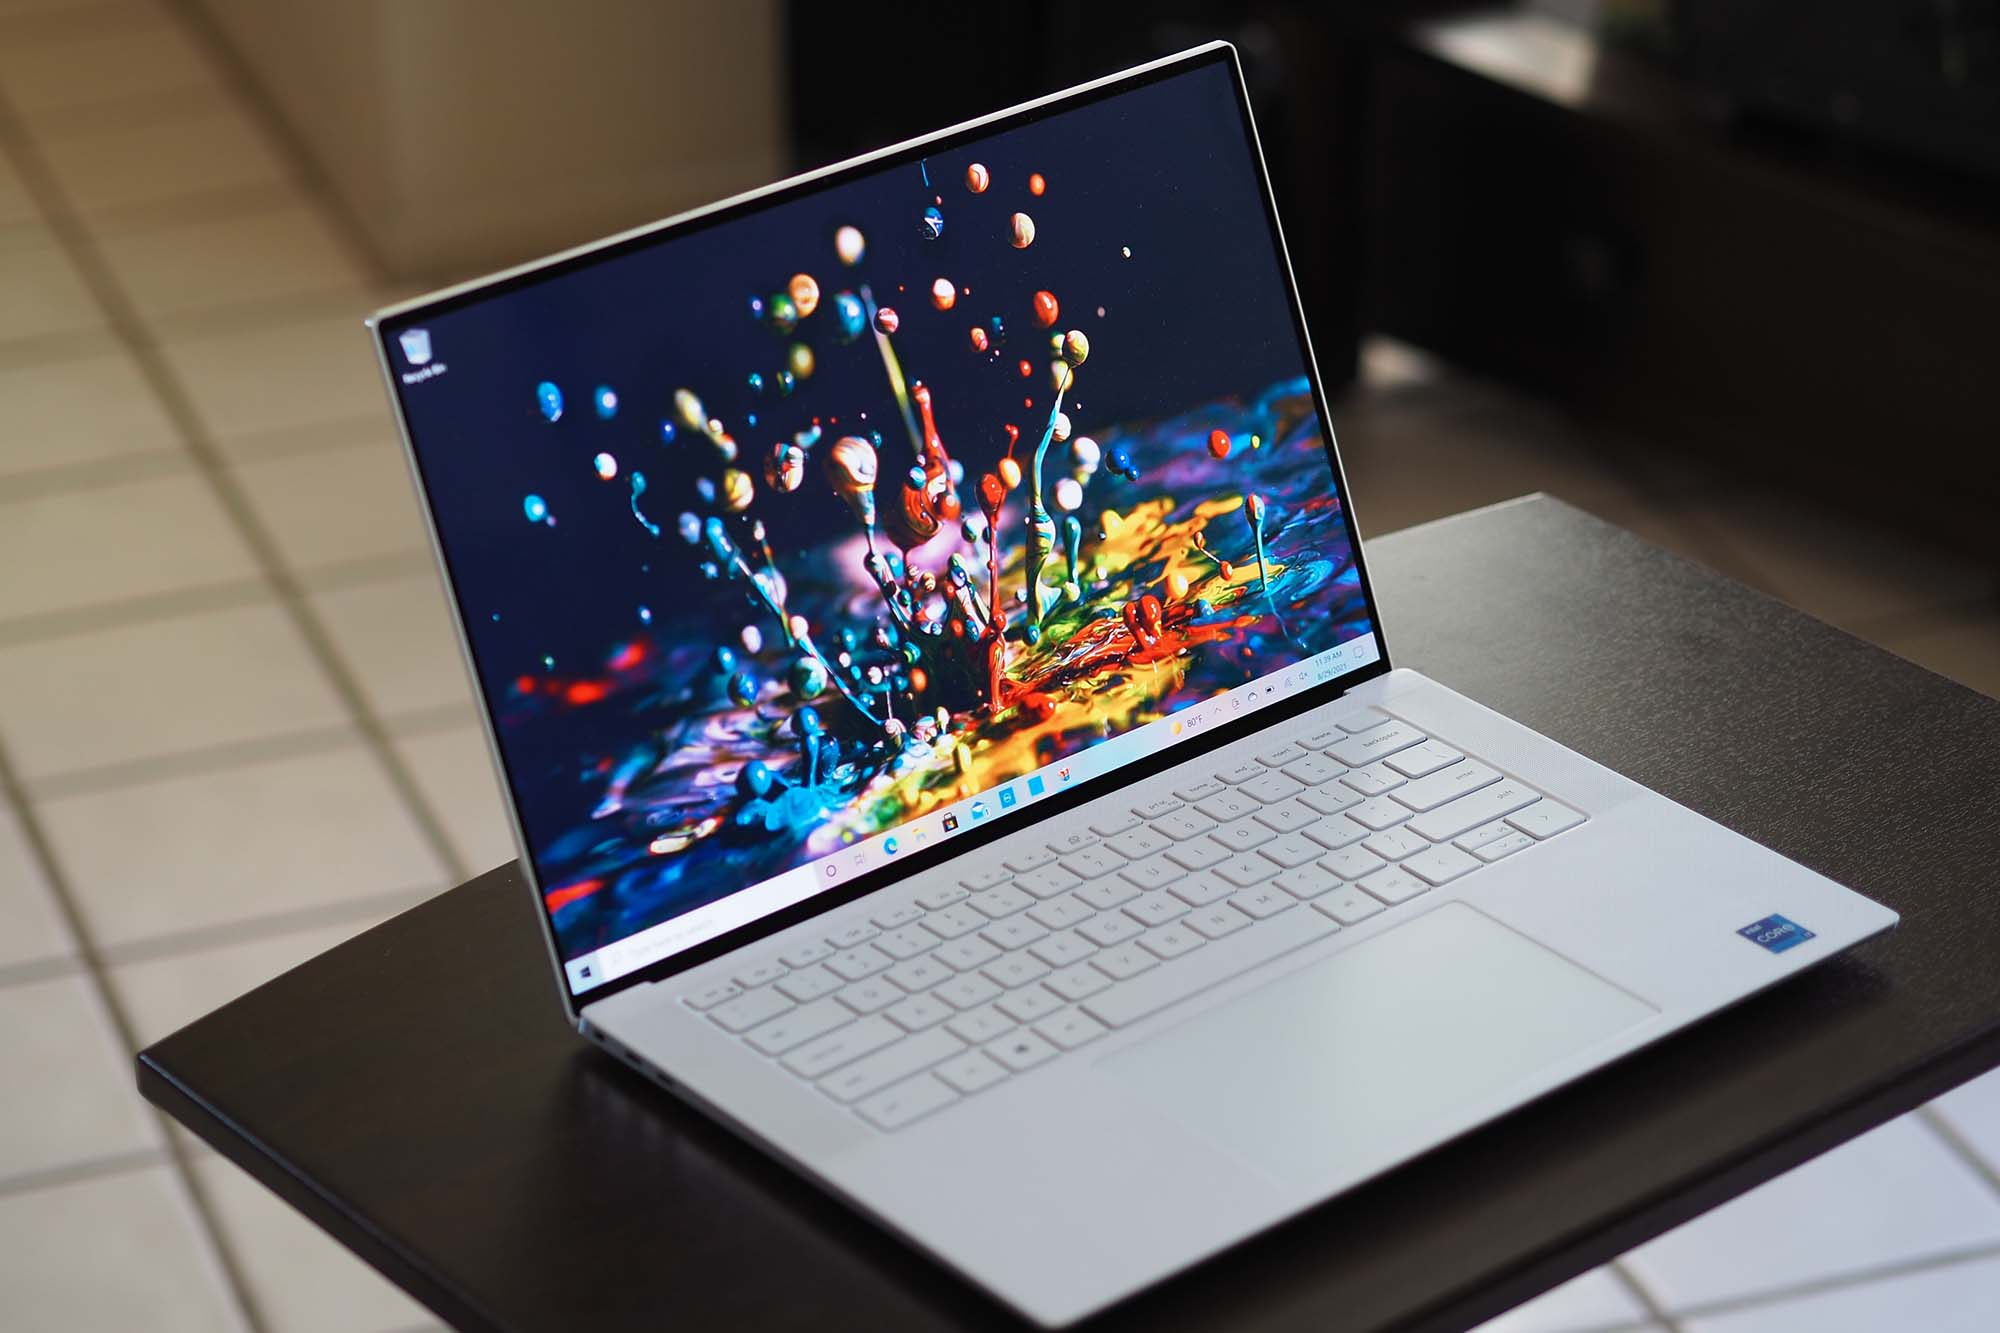 Dell XPS 15 OLED review: A practically perfect 15-inch laptop